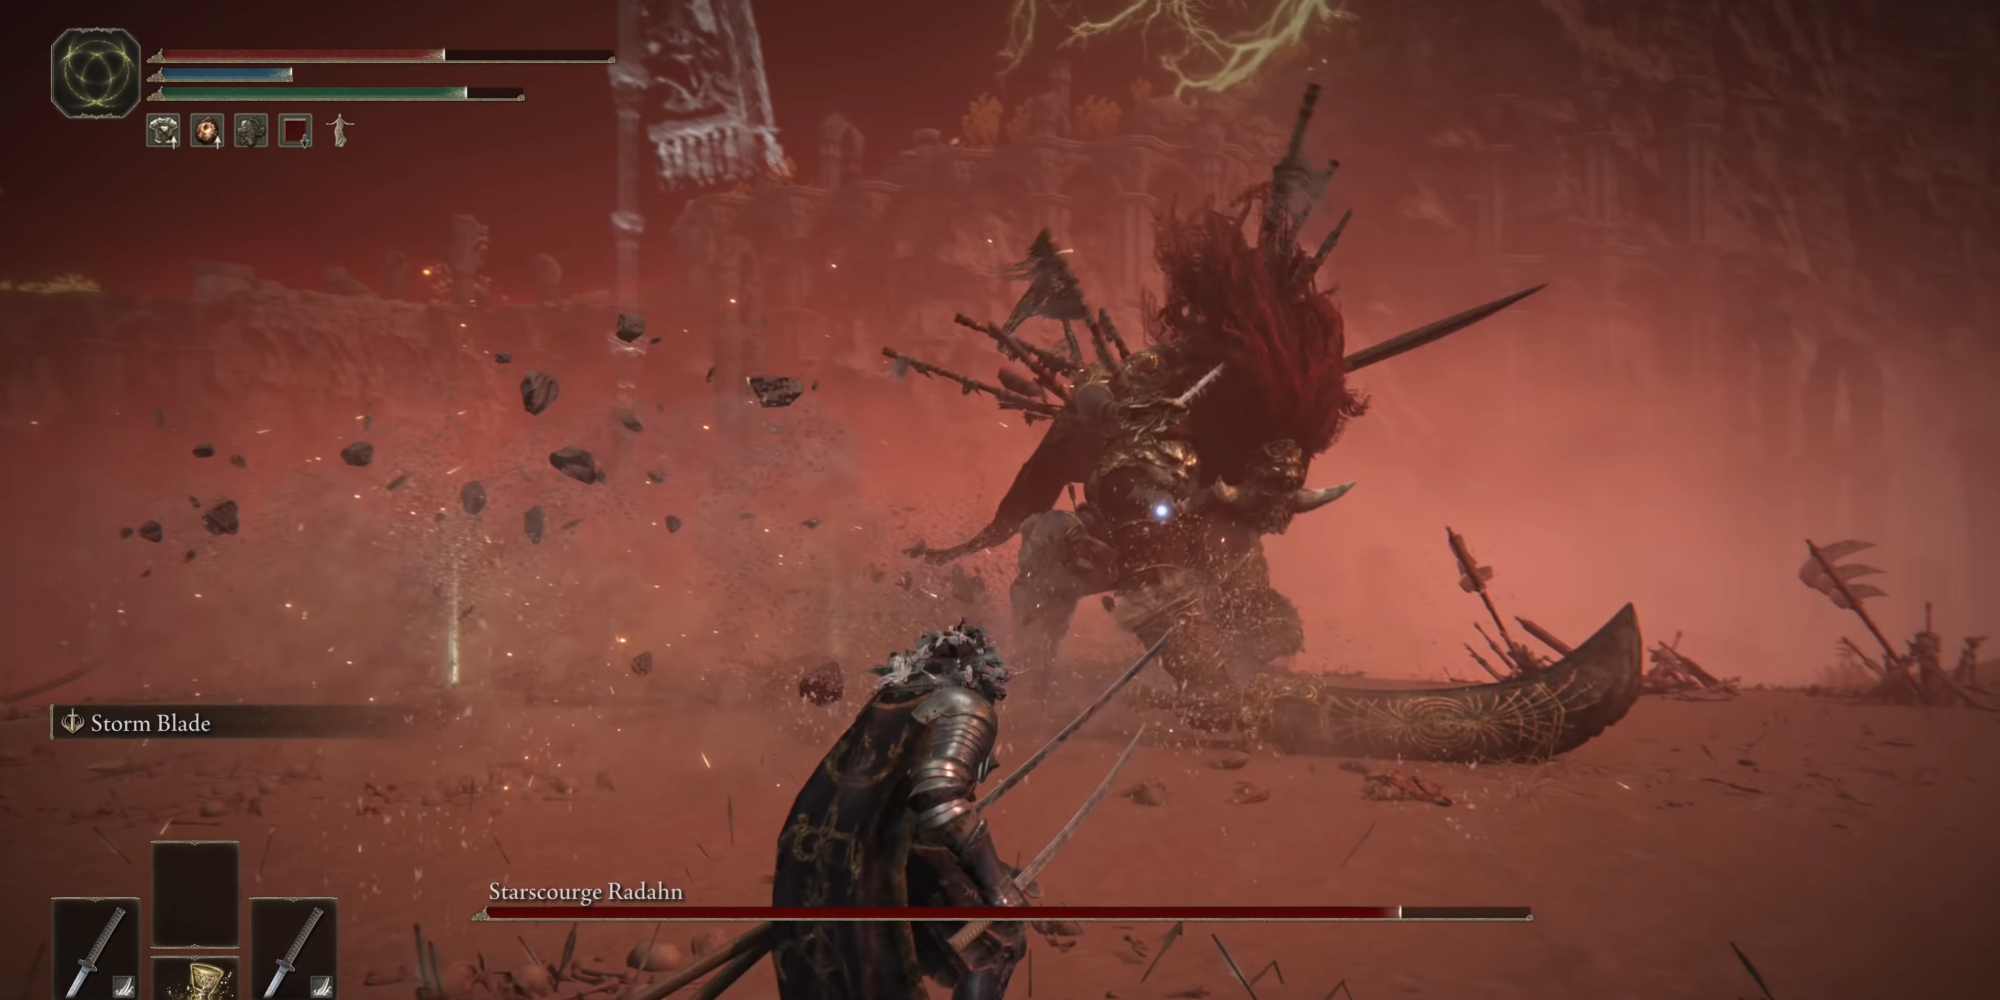 This image shows Starscourge Radahn using his basic attacks in Elden Ring.